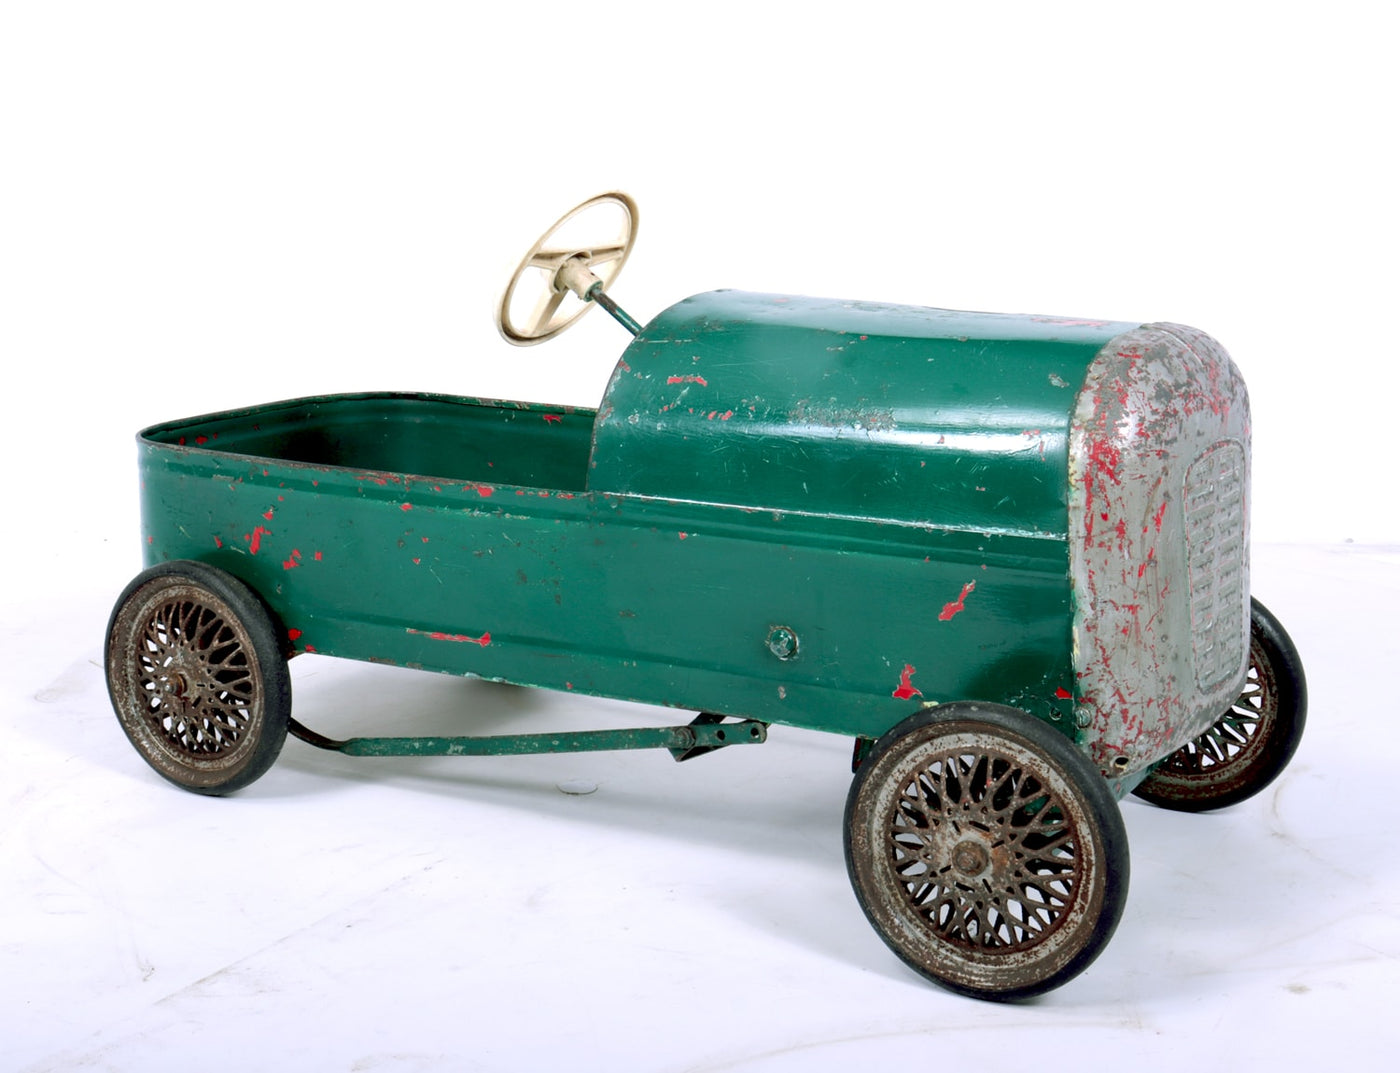 Vintage DUKE Pedal Car by Triang c1950